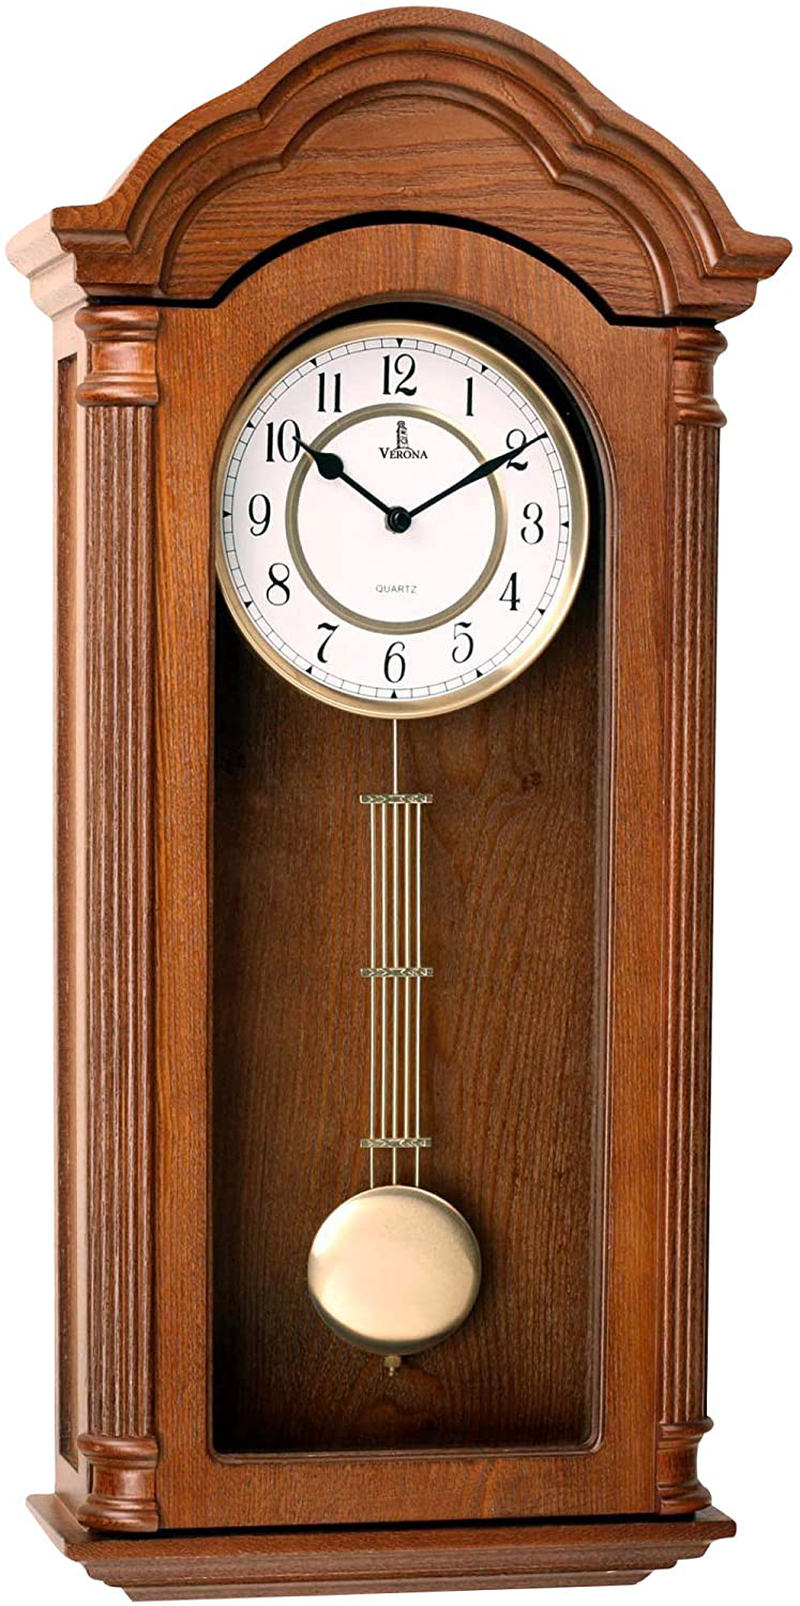 Pendulum Wall Clock, Silent Decorative Wood Clock with Swinging Pendulum, Battery Operated, Large Carved Wooden Design, for Living Room, Kitchen, Office & Home Décor, 26 x 12 inches Home & Garden > Decor > Clocks > Wall Clocks Lovely Home Essentials   